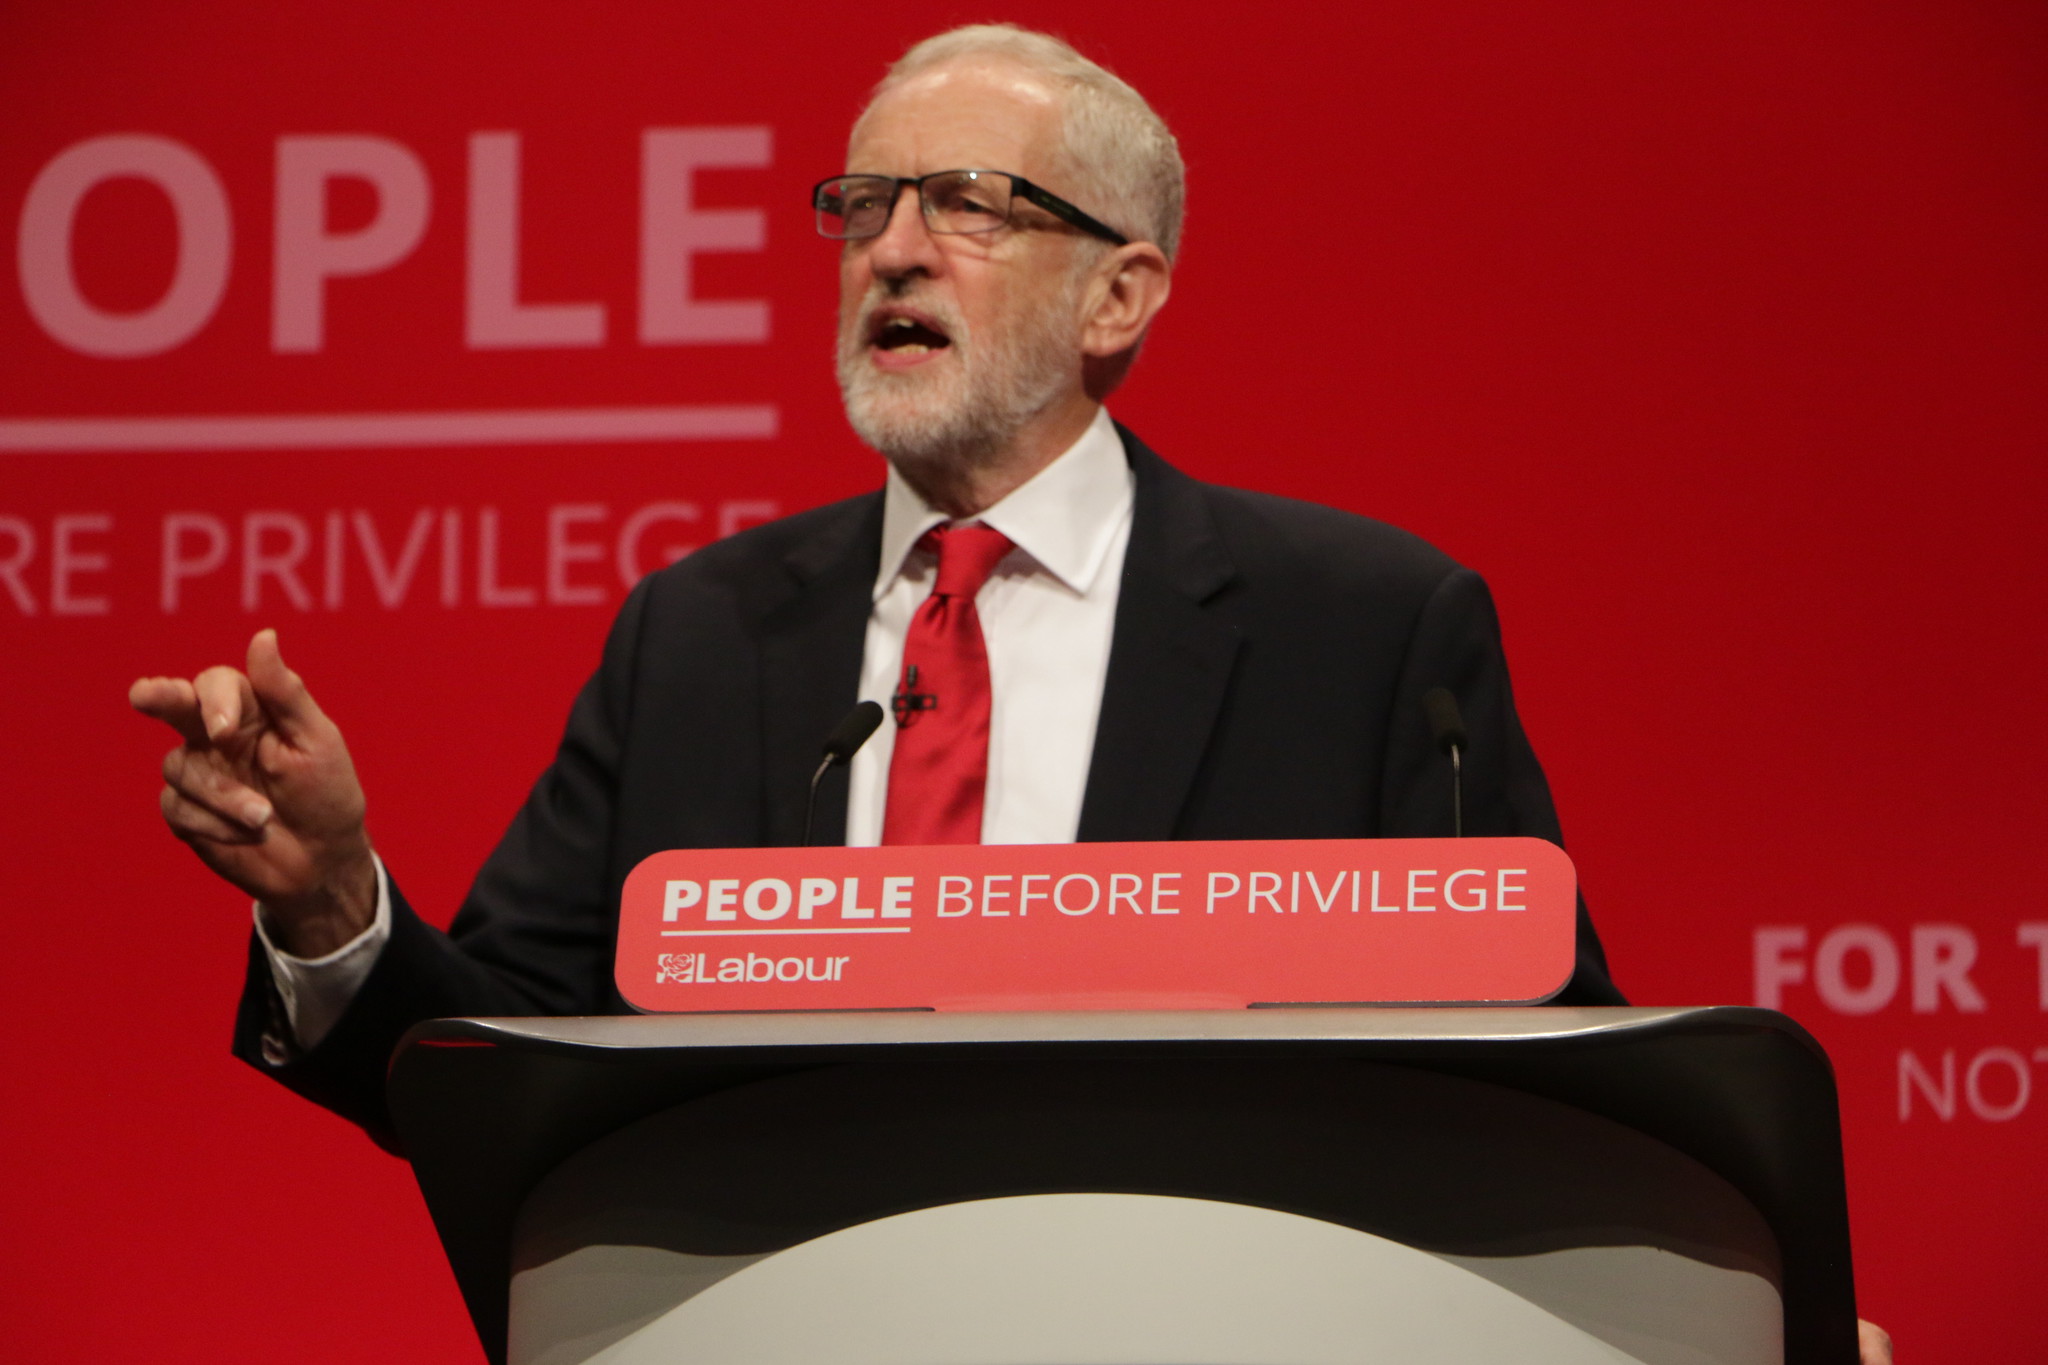 corbyn at conference Image Socialist Appeal